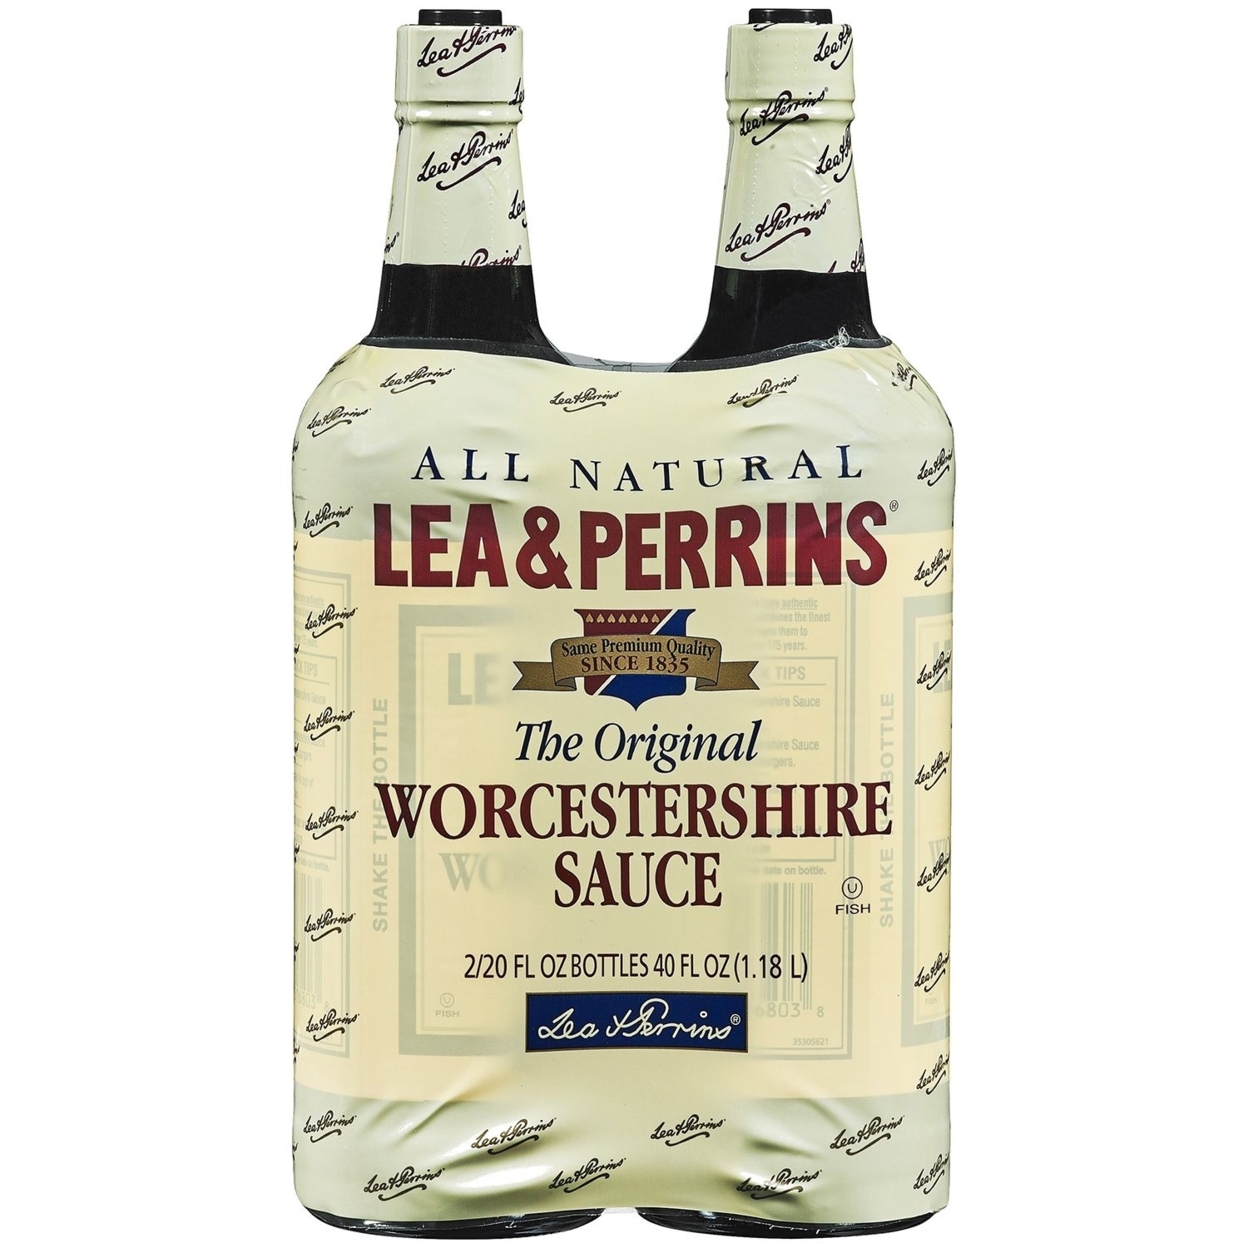 Lea & Perrins Worcestershire Sauce (20 Ounce Bottle, 2 Count)